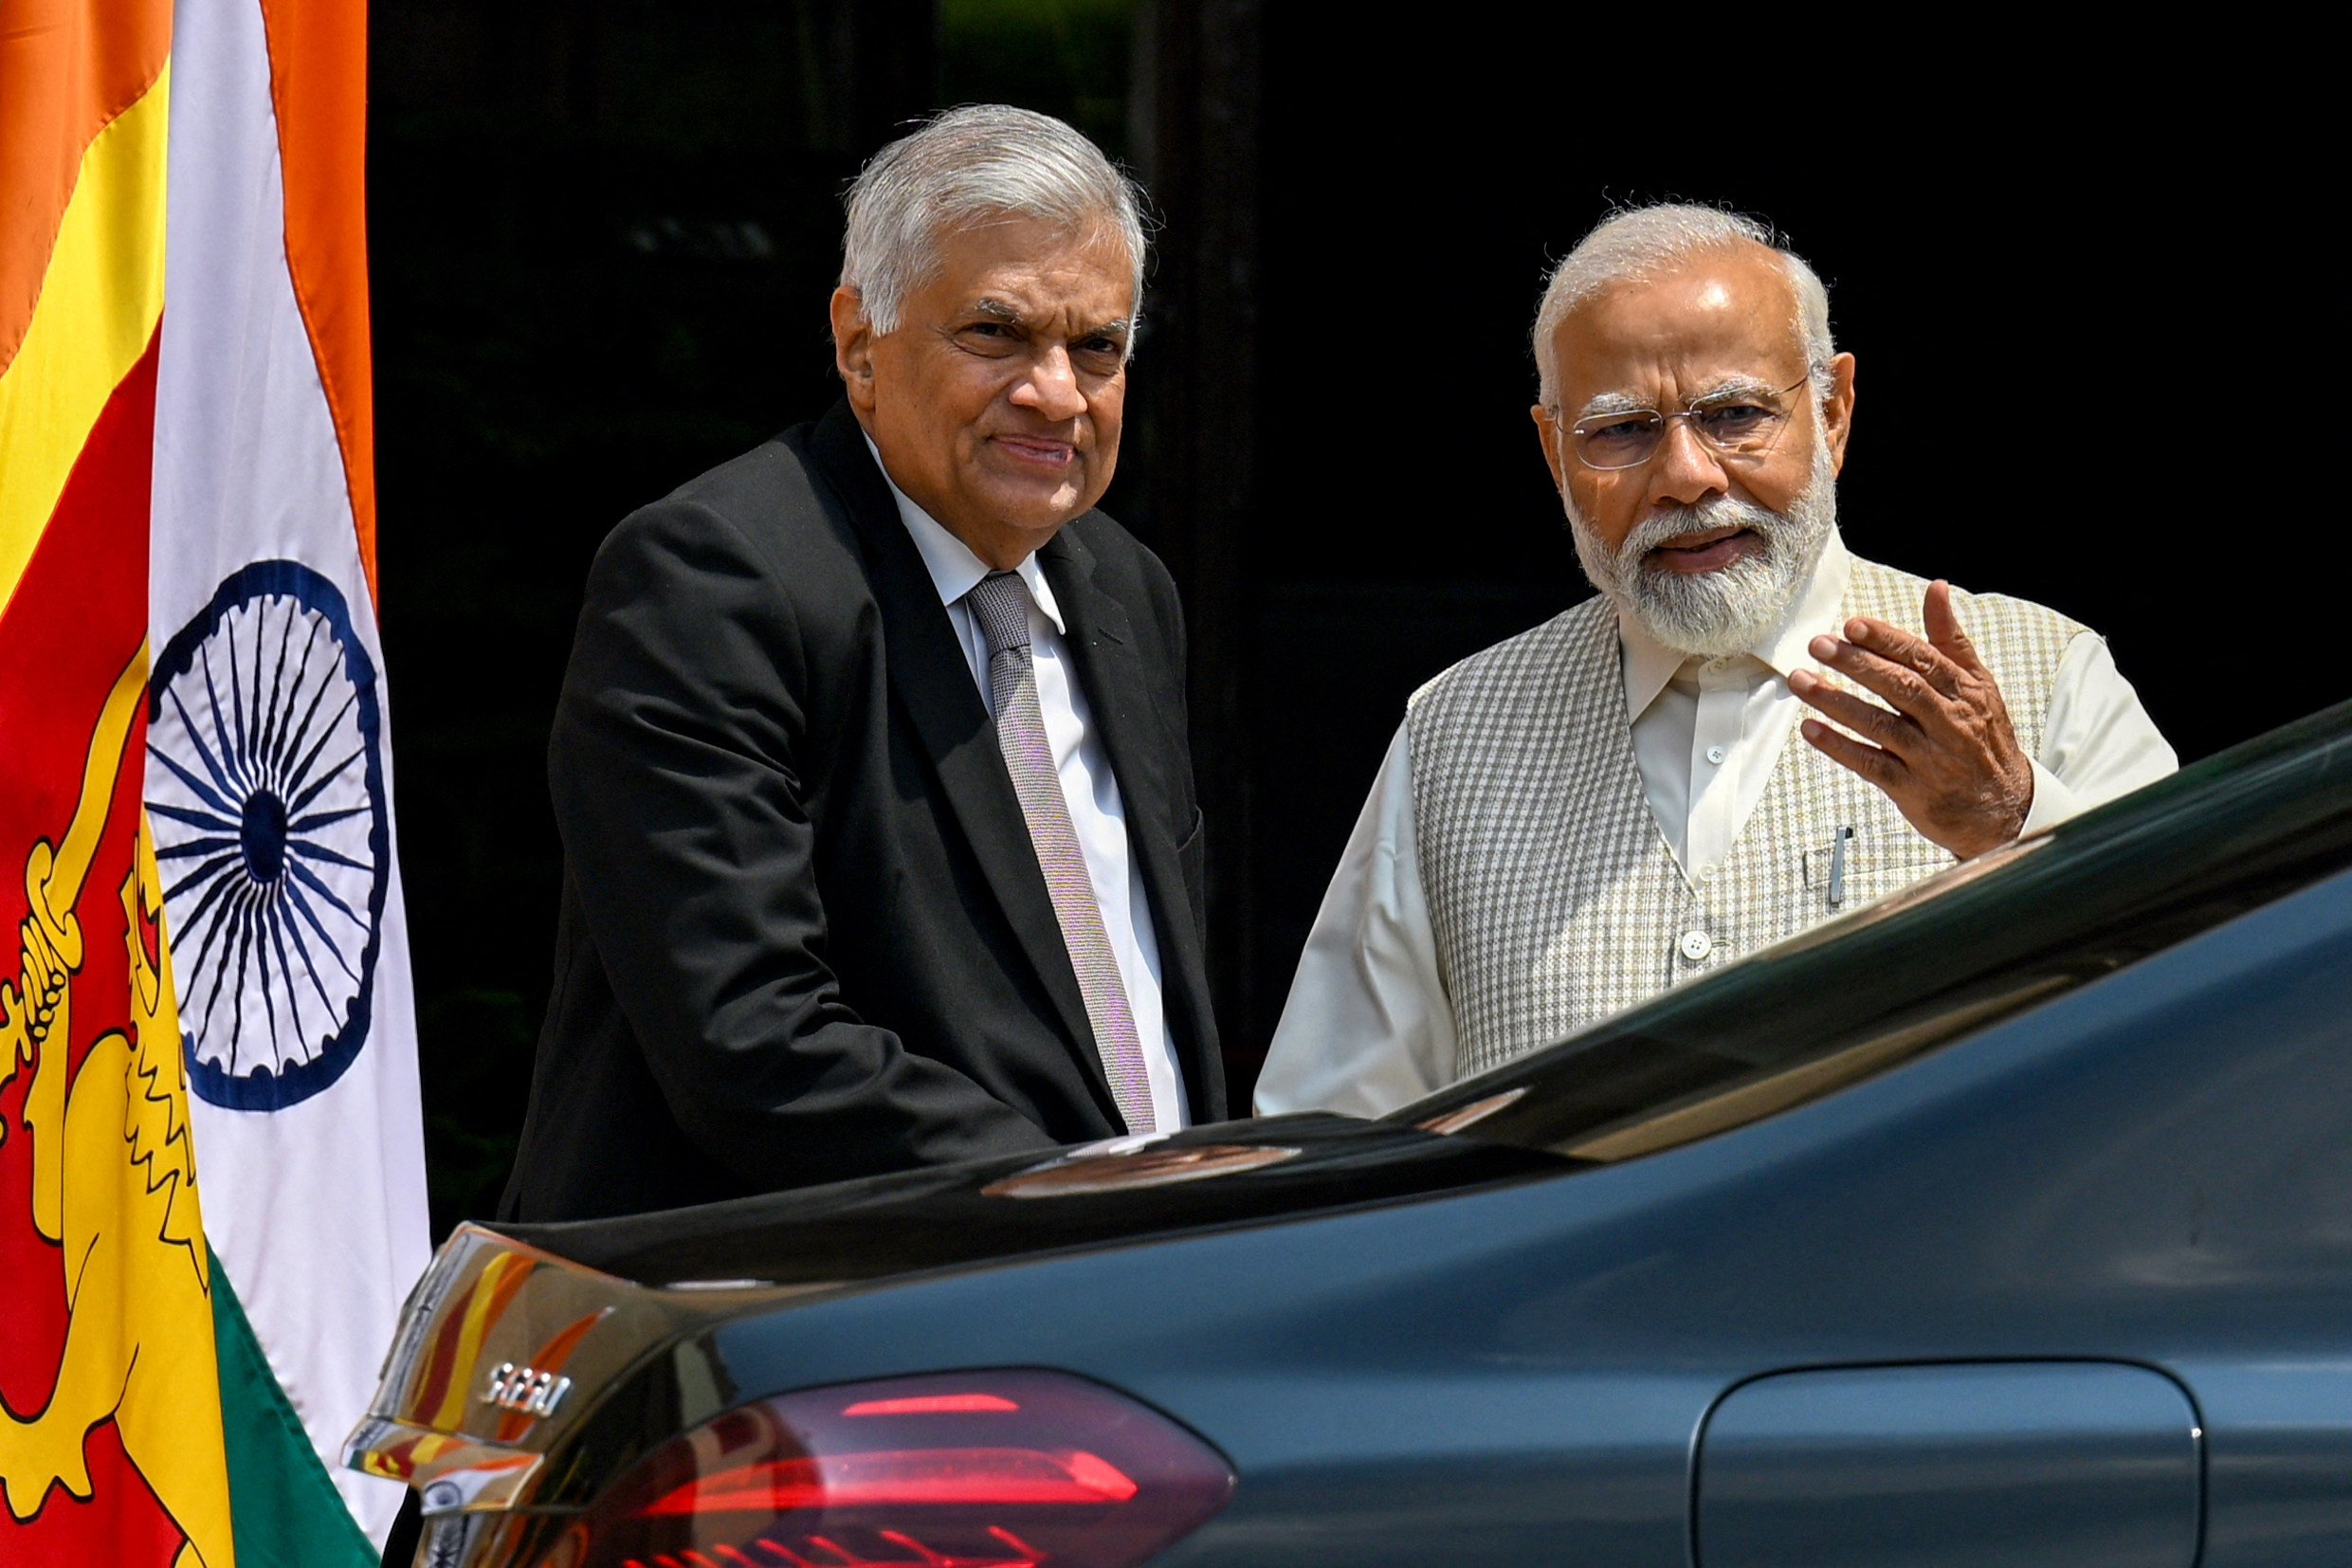 Sri Lankan President Ranil Wickremesinghe (left) with Indian Prime Minister Narendra Modi in New Delhi last year. India provided Sri Lanka with US$4 billion in emergency financing after the island nation went bankrupt. Photo: AFP